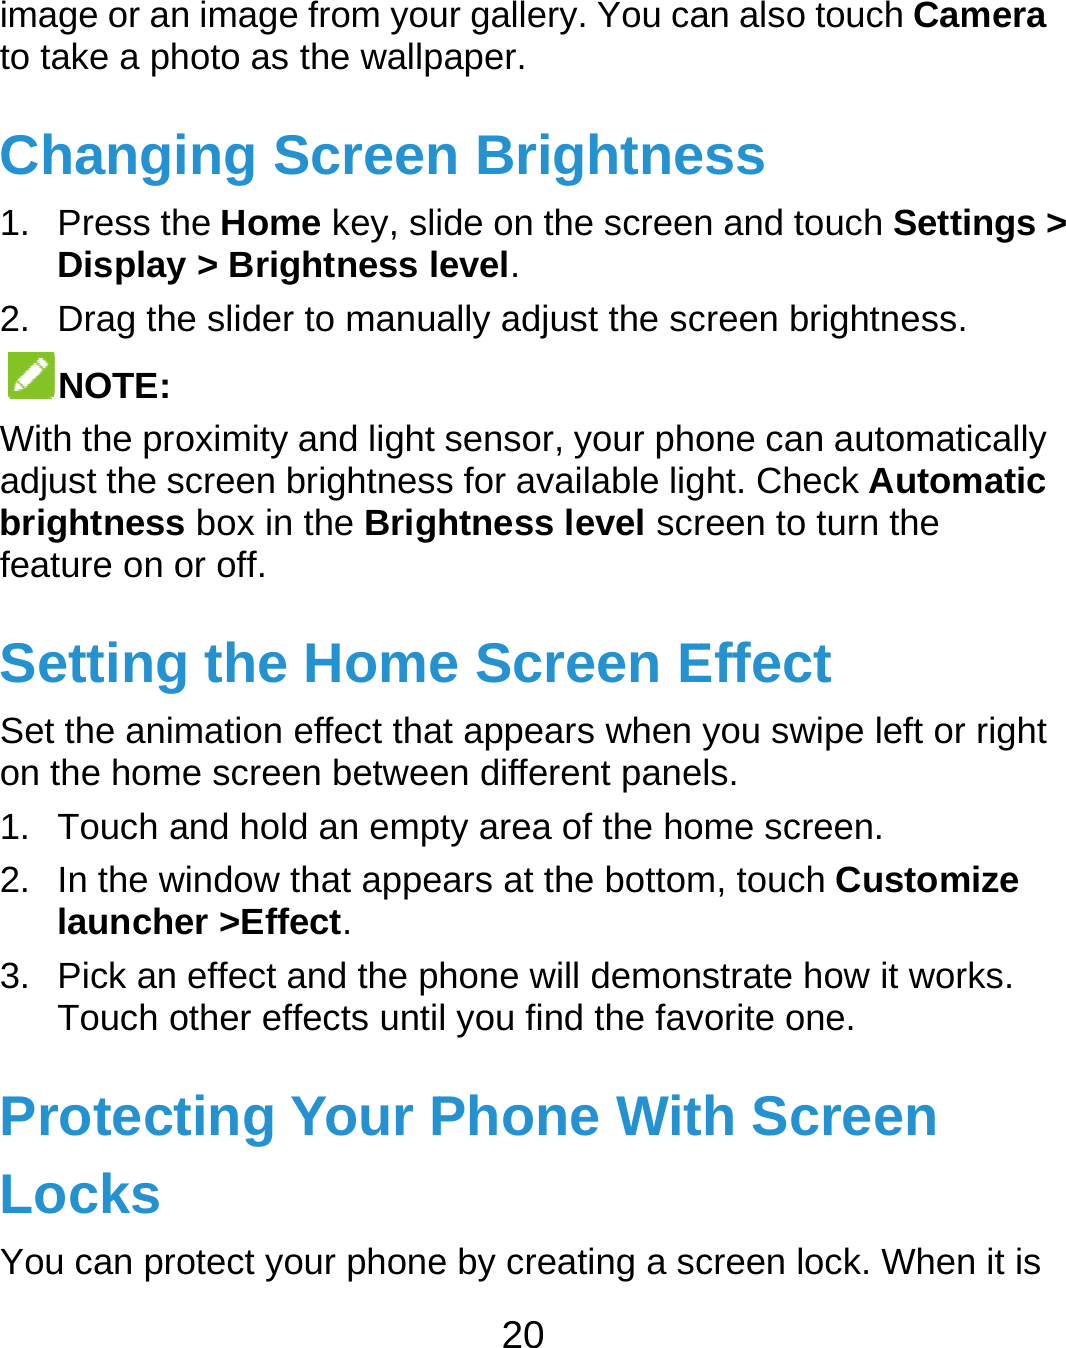  image or anto take a phChangi1. Press thDisplay2. Drag theNOTE: With the proadjust the sbrightnessfeature on oSettingSet the animon the hom1. Touch a2. In the wlaunche3. Pick an Touch oProtectLocks You can pron image from youhoto as the wallping Screenhe Home key, sliy &gt; Brightness le slider to manuaoximity and light screen brightnesss box in the Brigor off. g the Homemation effect thame screen betweeand hold an empwindow that appeer &gt;Effect. effect and the pother effects untiting Your Potect your phone20 ur gallery. You capaper. n Brightneide on the screenevel. ally adjust the scsensor, your phos for available lightness level scre Screen Eat appears when en different panety area of the hoears at the bottomhone will demonl you find the favPhone Wite by creating a scan also touch Camess n and touch Settcreen brightness.one can automatght. Check Automreen to turn the Effect you swipe left orls. ome screen. m, touch Customstrate how it worvorite one. th Screen creen lock. Whenmera ings &gt; . tically matic r right mize rks. n it is 